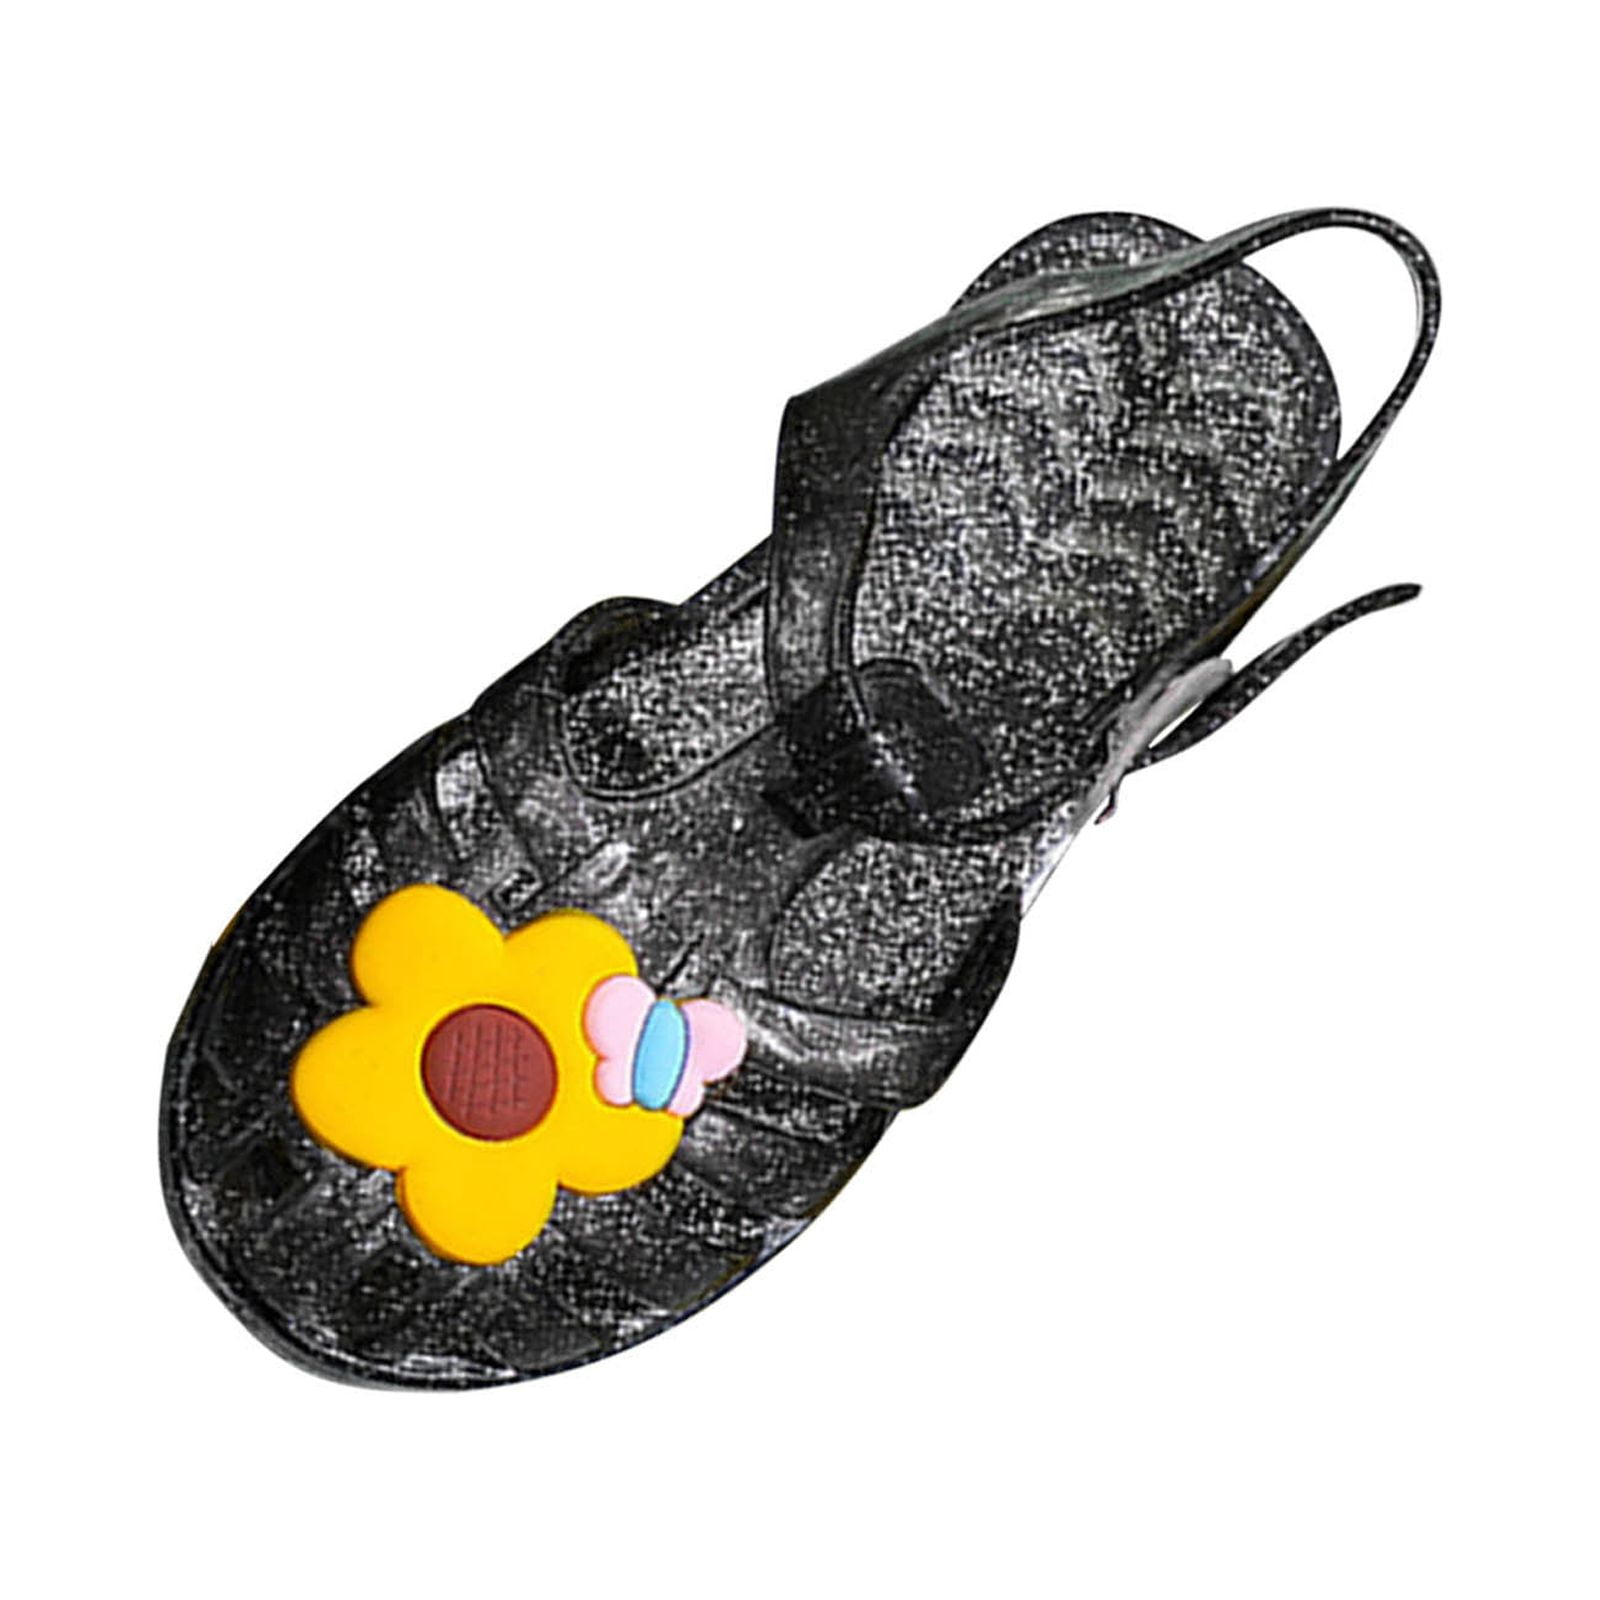 Lovskoo Little Girls Jelly Sandal for 7 Years Old Hollow Out Non-slip Cute  Fruit Soft Sole Beach Roman Sandals Yellow 